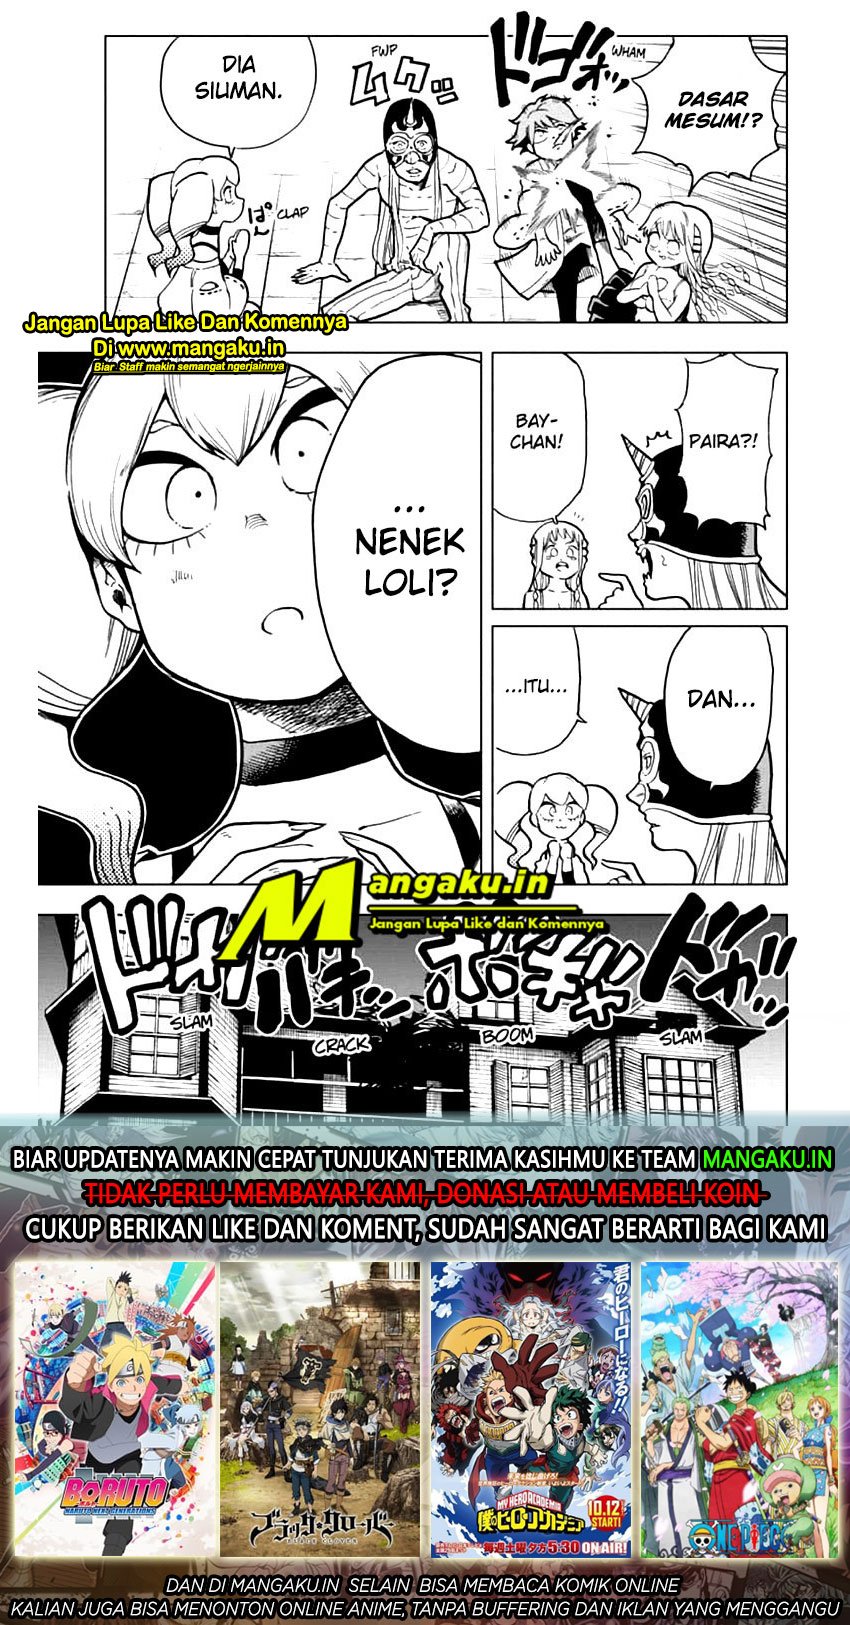 Bone Collection Chapter 07